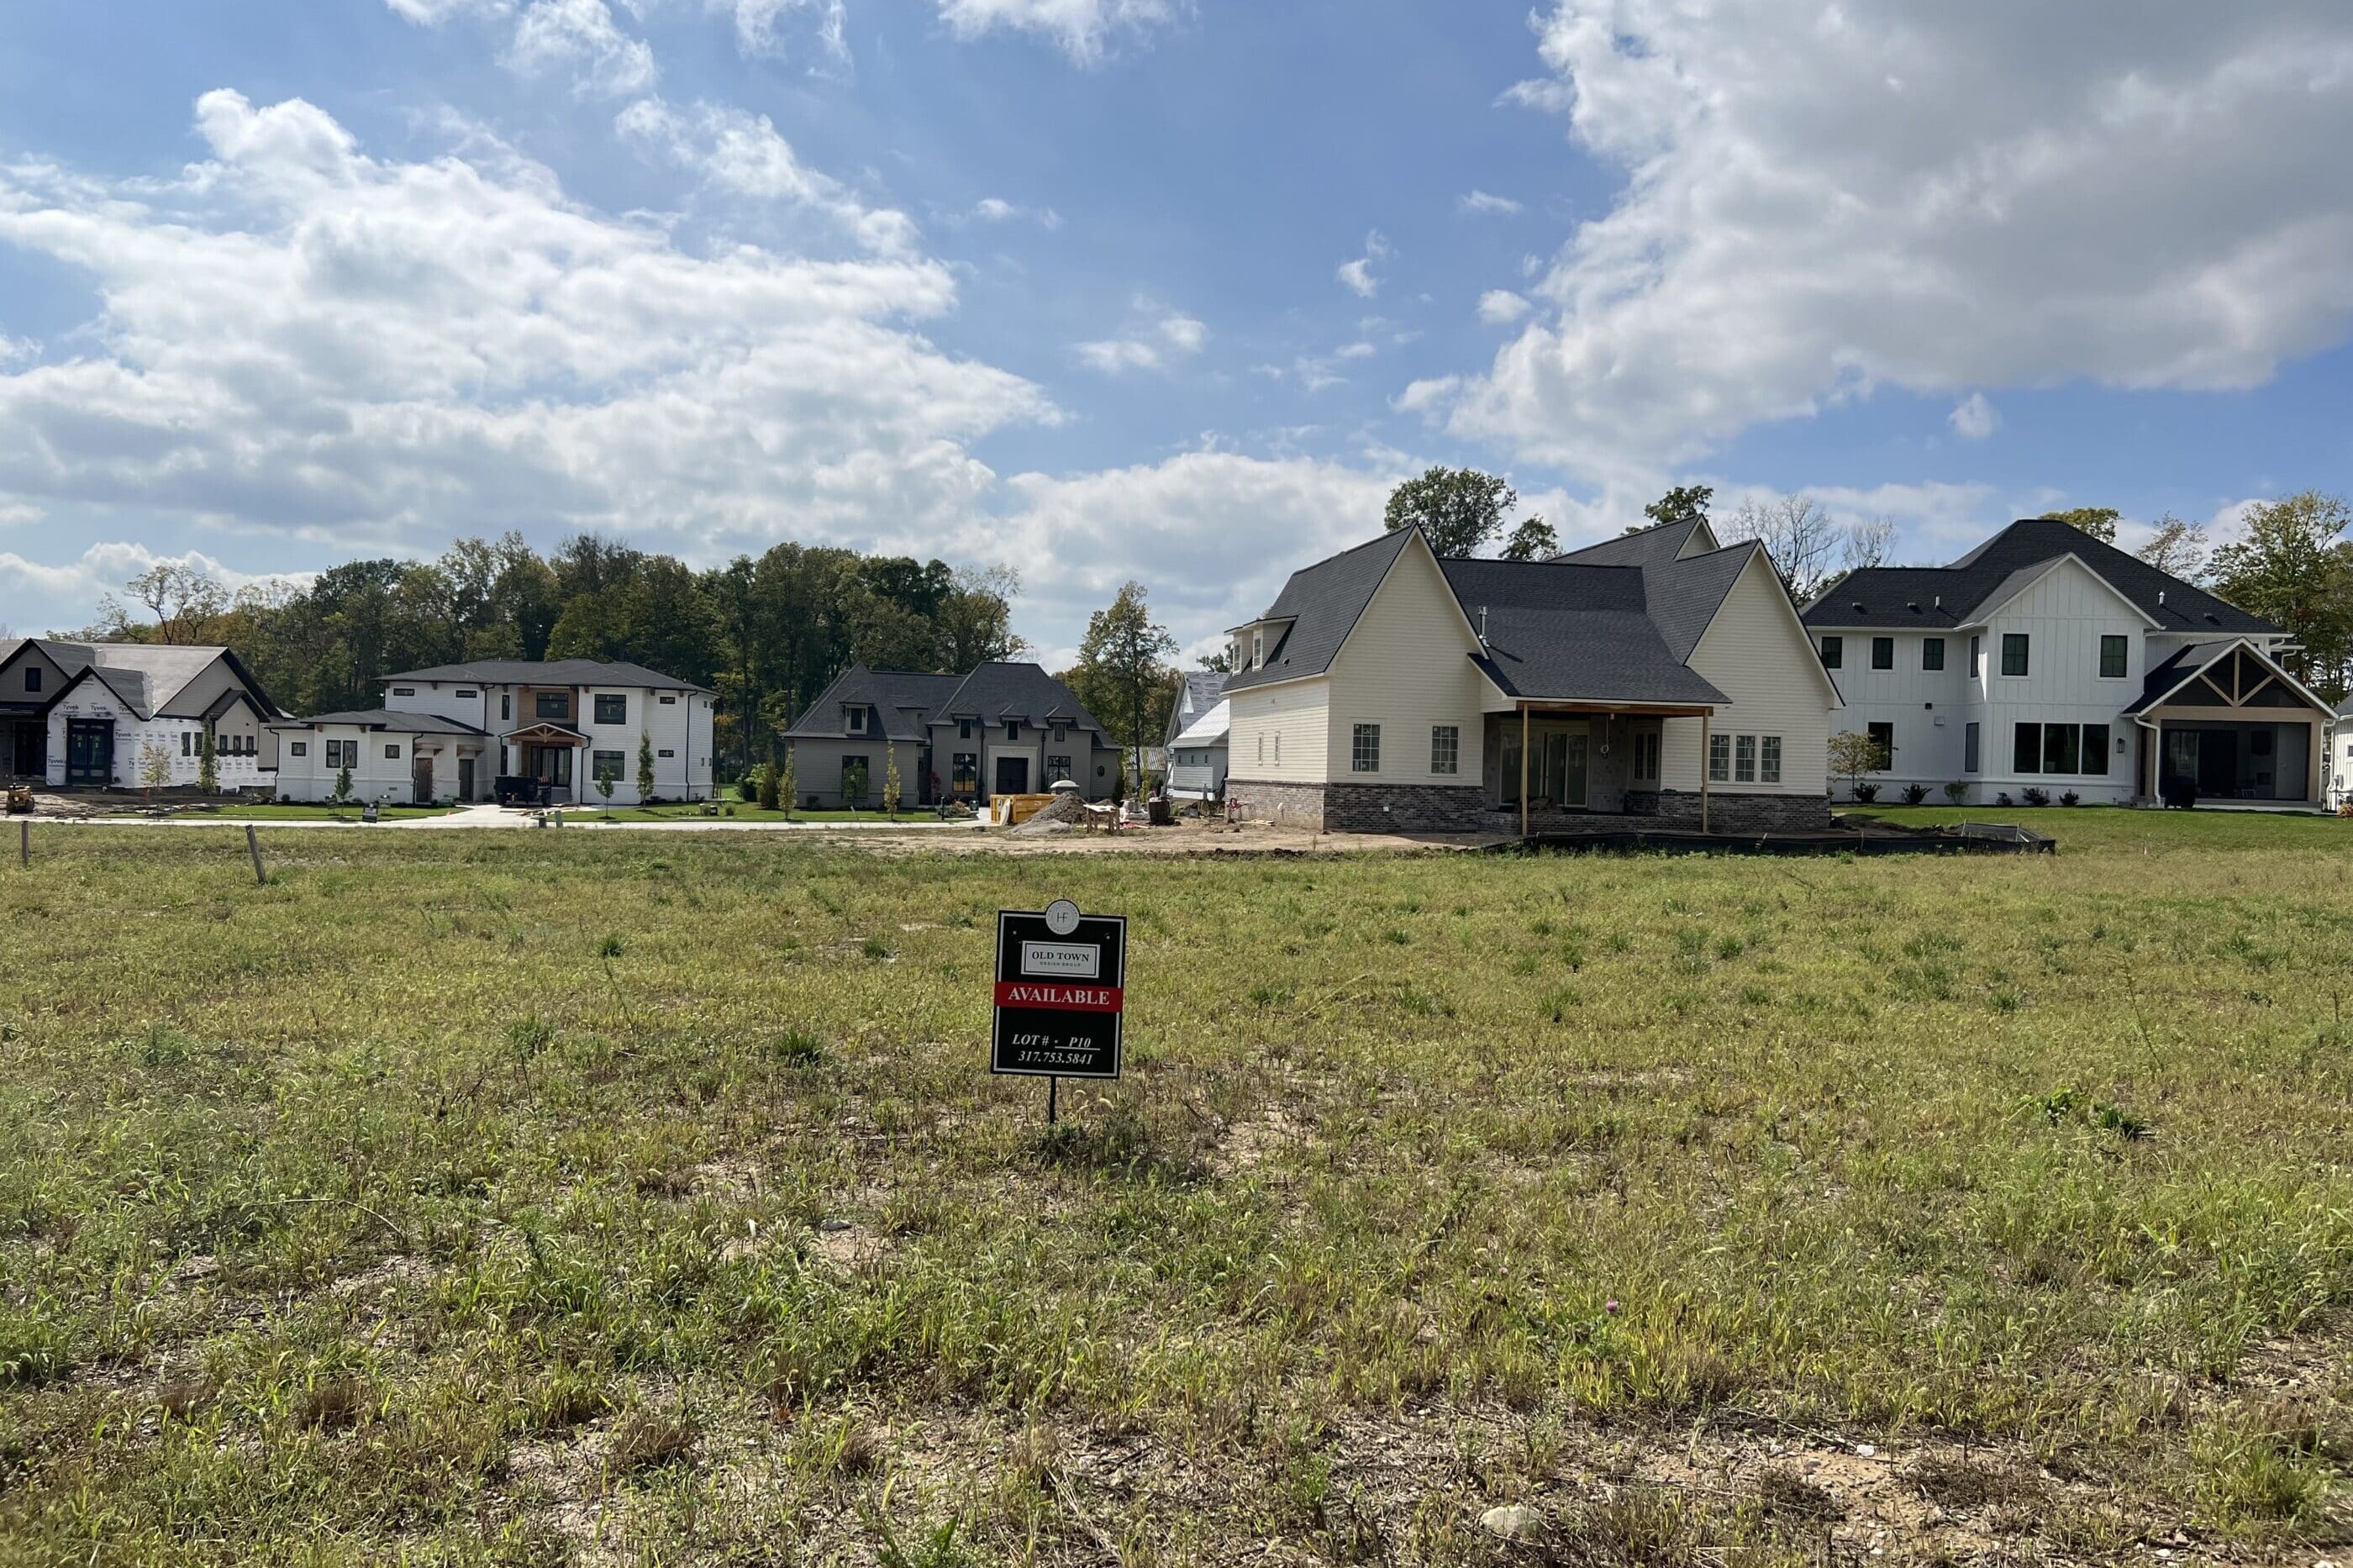 A field with houses and a sign in front of it, showcasing luxurious custom homes built by a top custom home builder in Indianapolis Indiana.